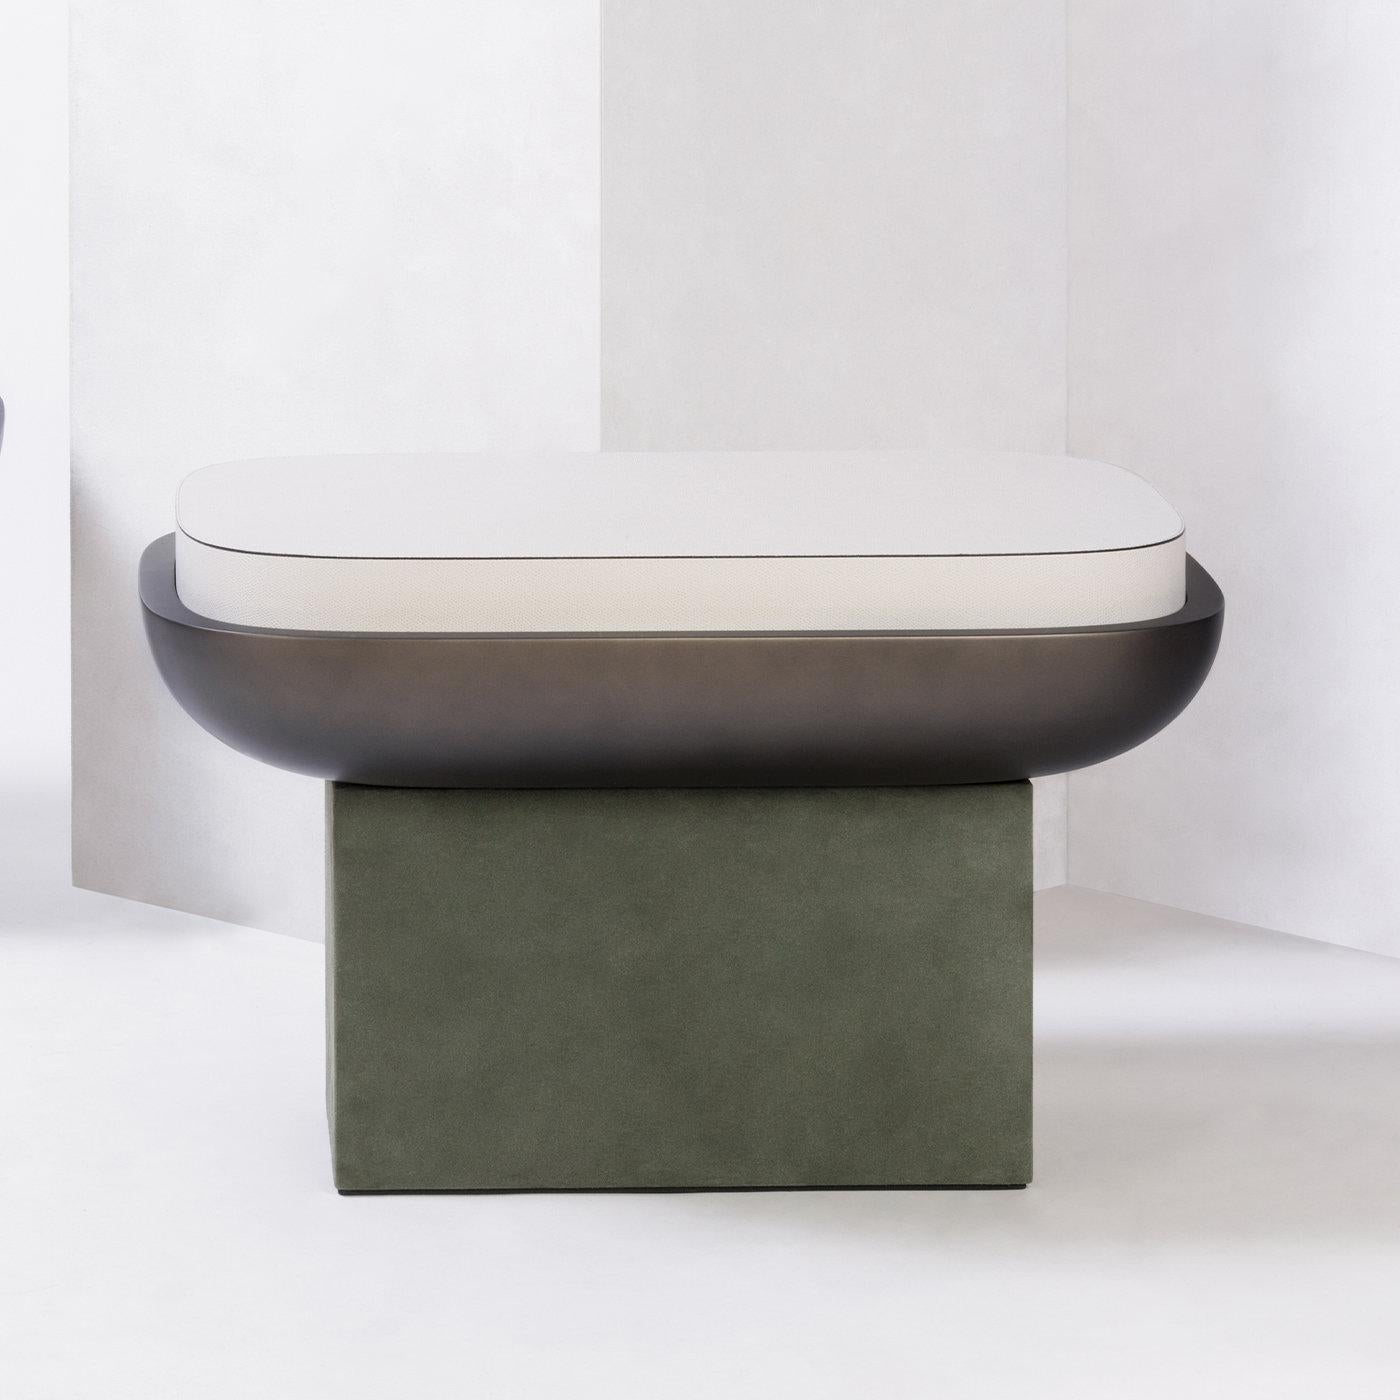 Contemporary rectangular leather stool - Olympia by Stephane Parmentier for Giobagnara.
The object presented in the image has following finish: F95 Off White Nappa Leather (top), A02 Loden Green Suede Leather (base) and Bronze-laquered Wood Seat